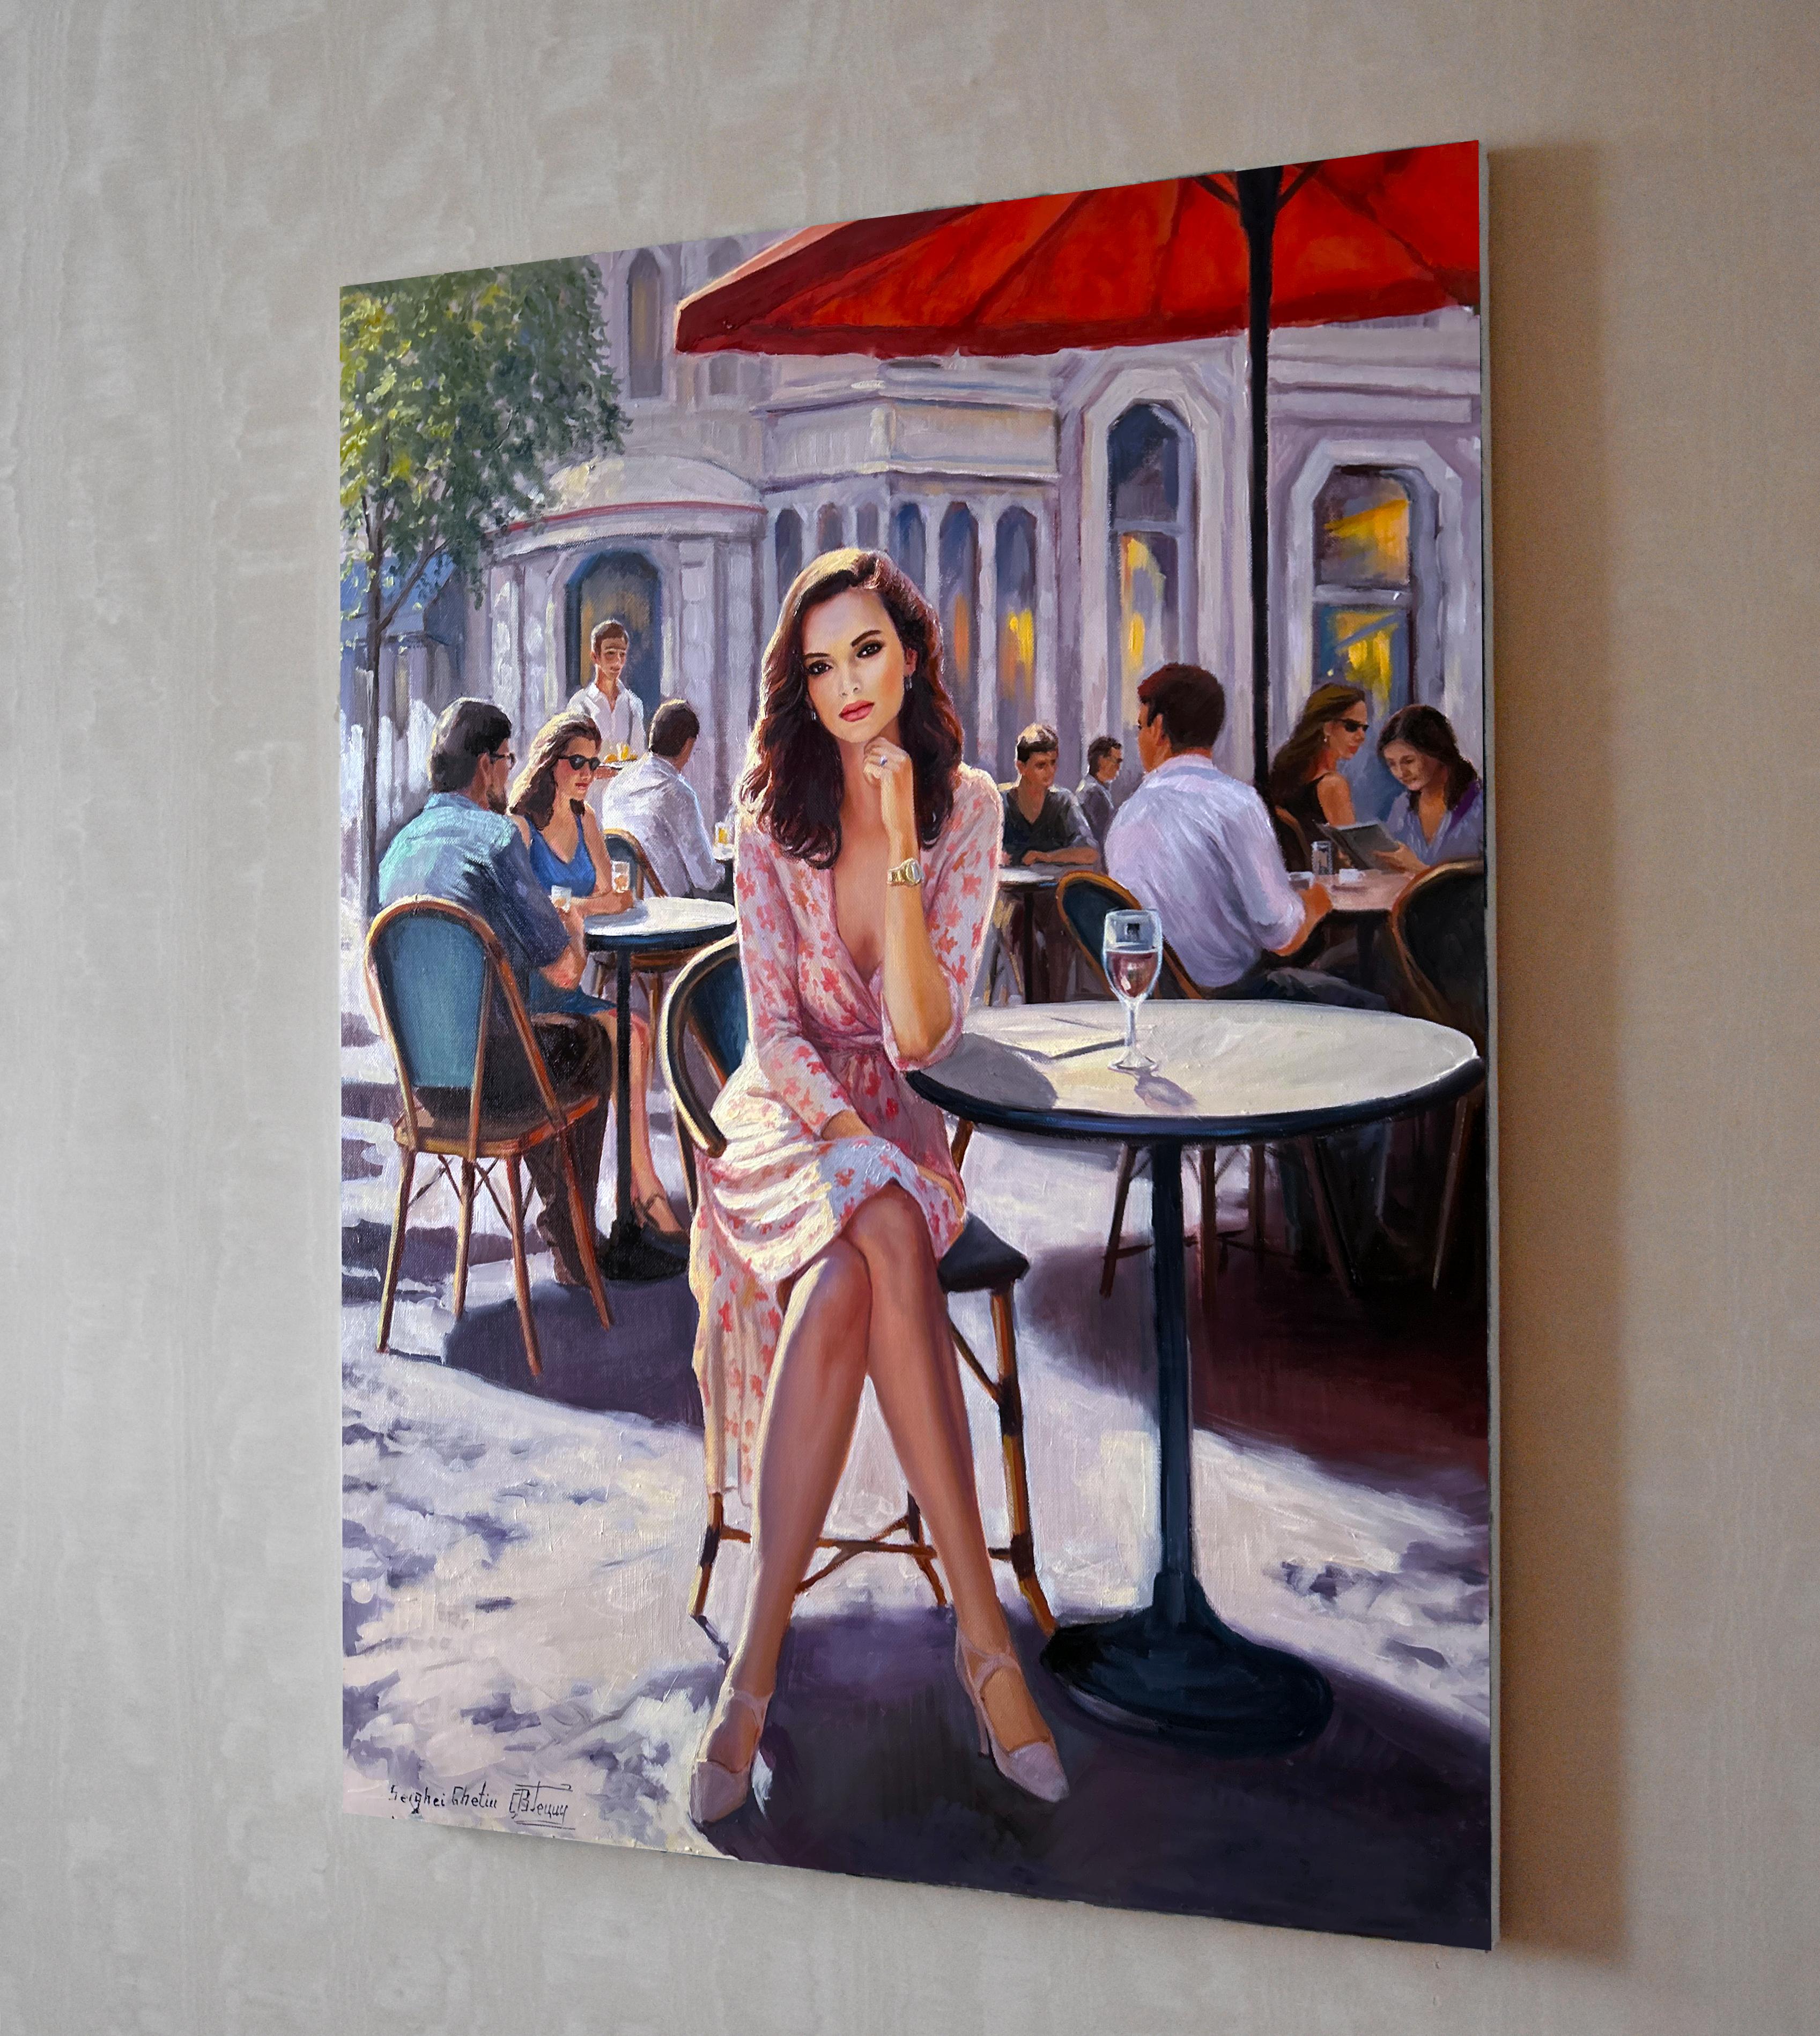 A continuation of summer café scenes, a beautiful woman is awaiting for her order. A contrasting realistic artwork with atmospheric scene for any interiors. Professional paints on linen canvas.